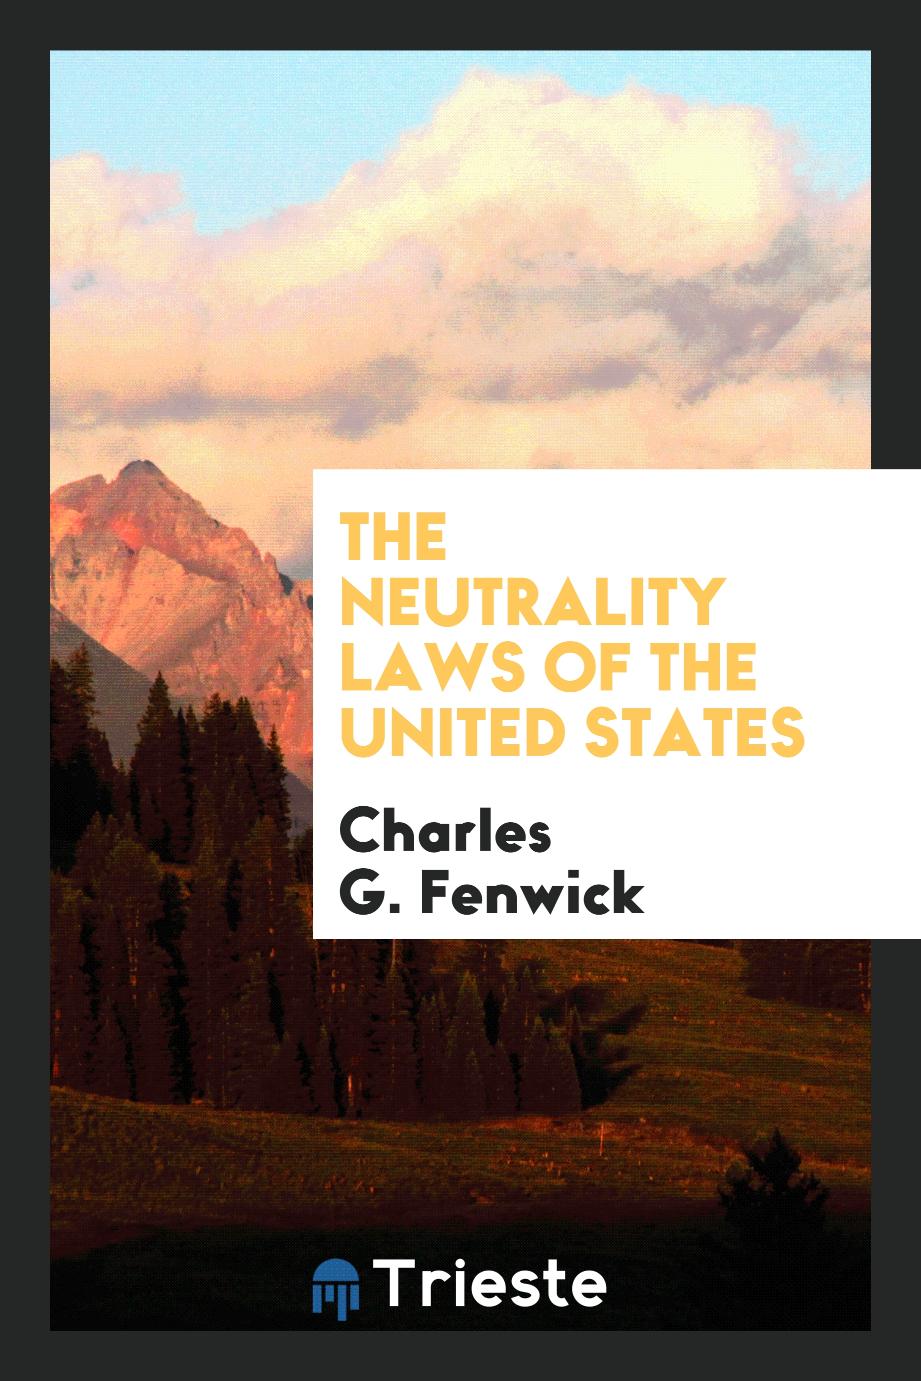 The neutrality laws of the United States